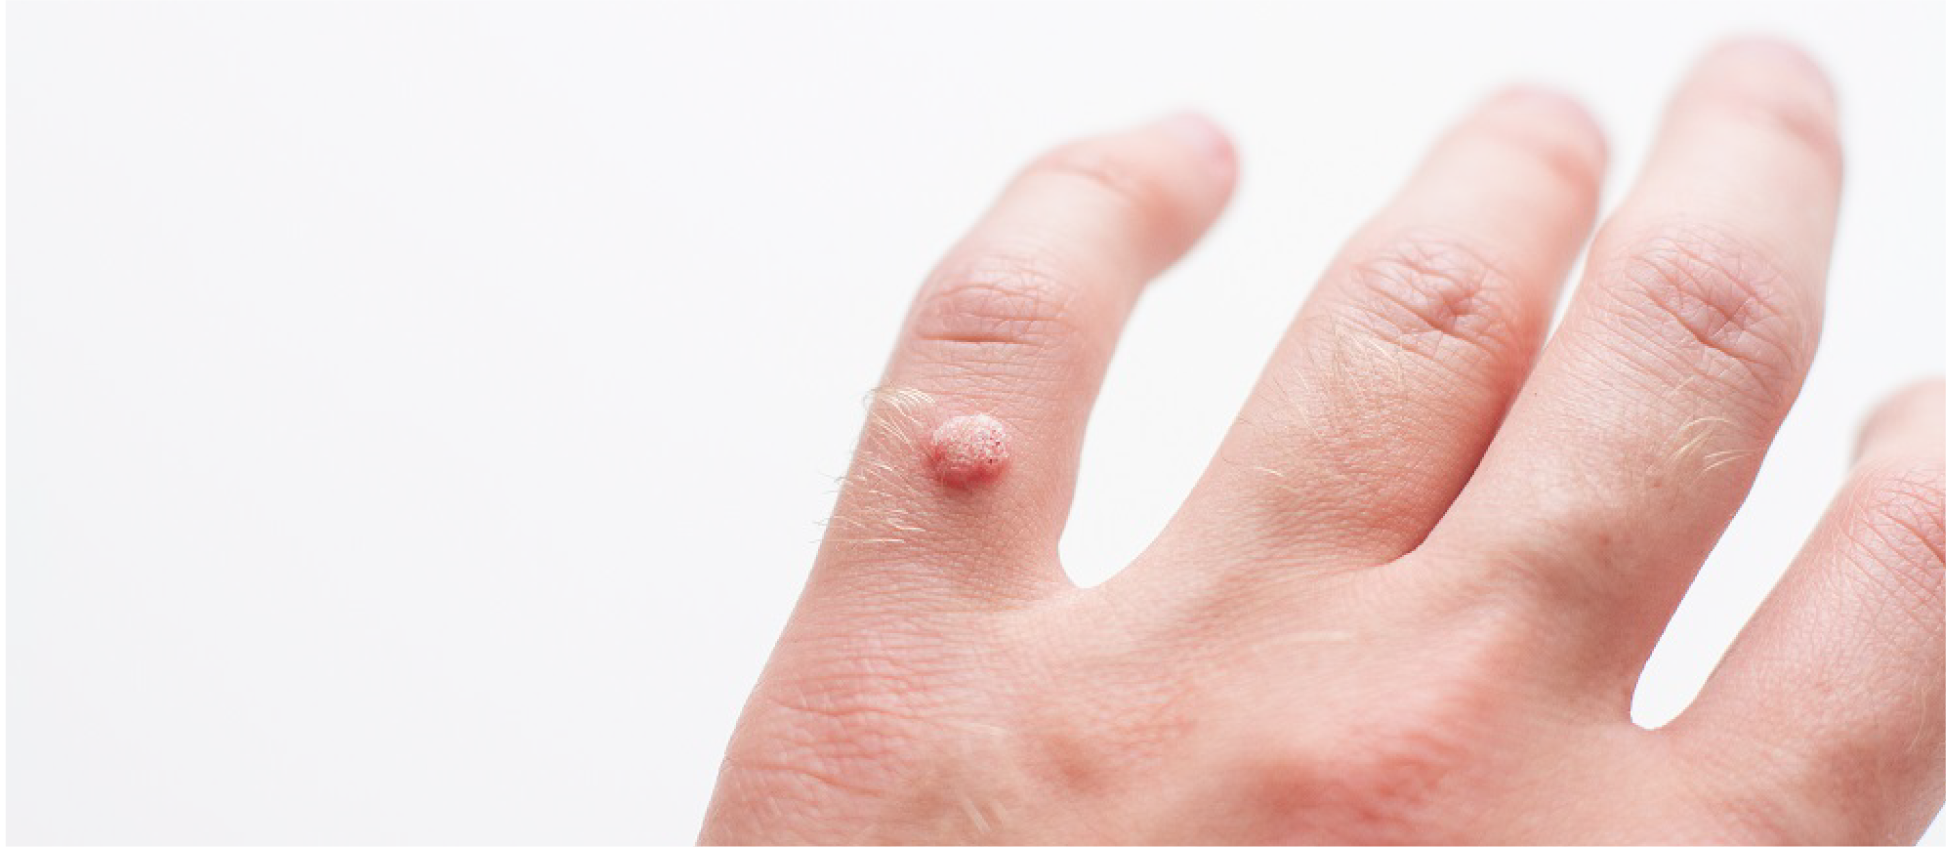 Professional Warts and Moles Removal Treatments | DR REBORN